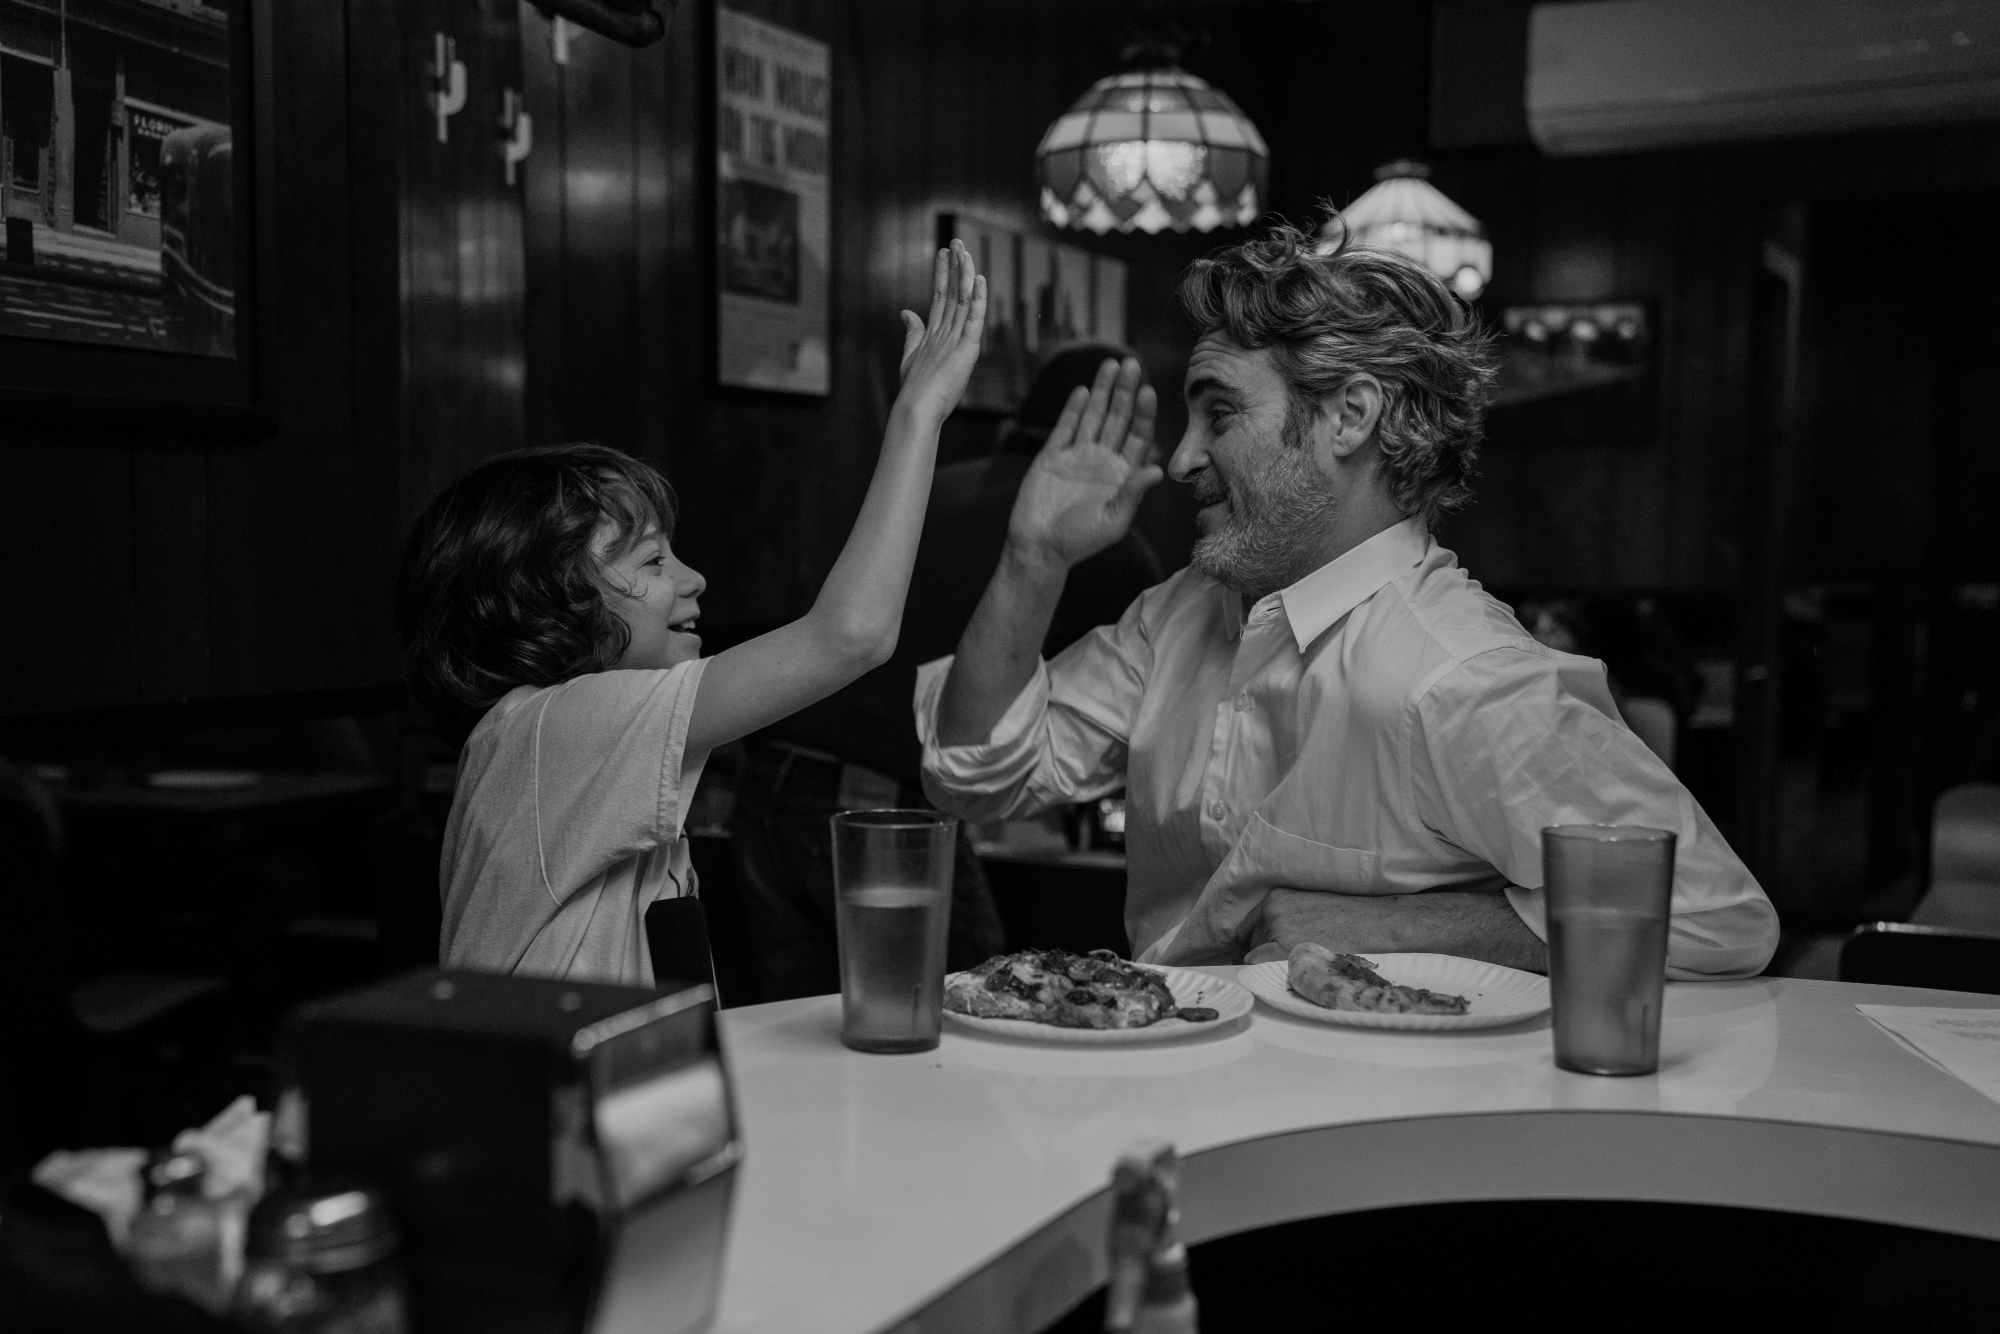 'C'mon C'mon' Woody Norman as Jesse and Joaquin Phoenix as Johnny high-fiving at a restaurant counter